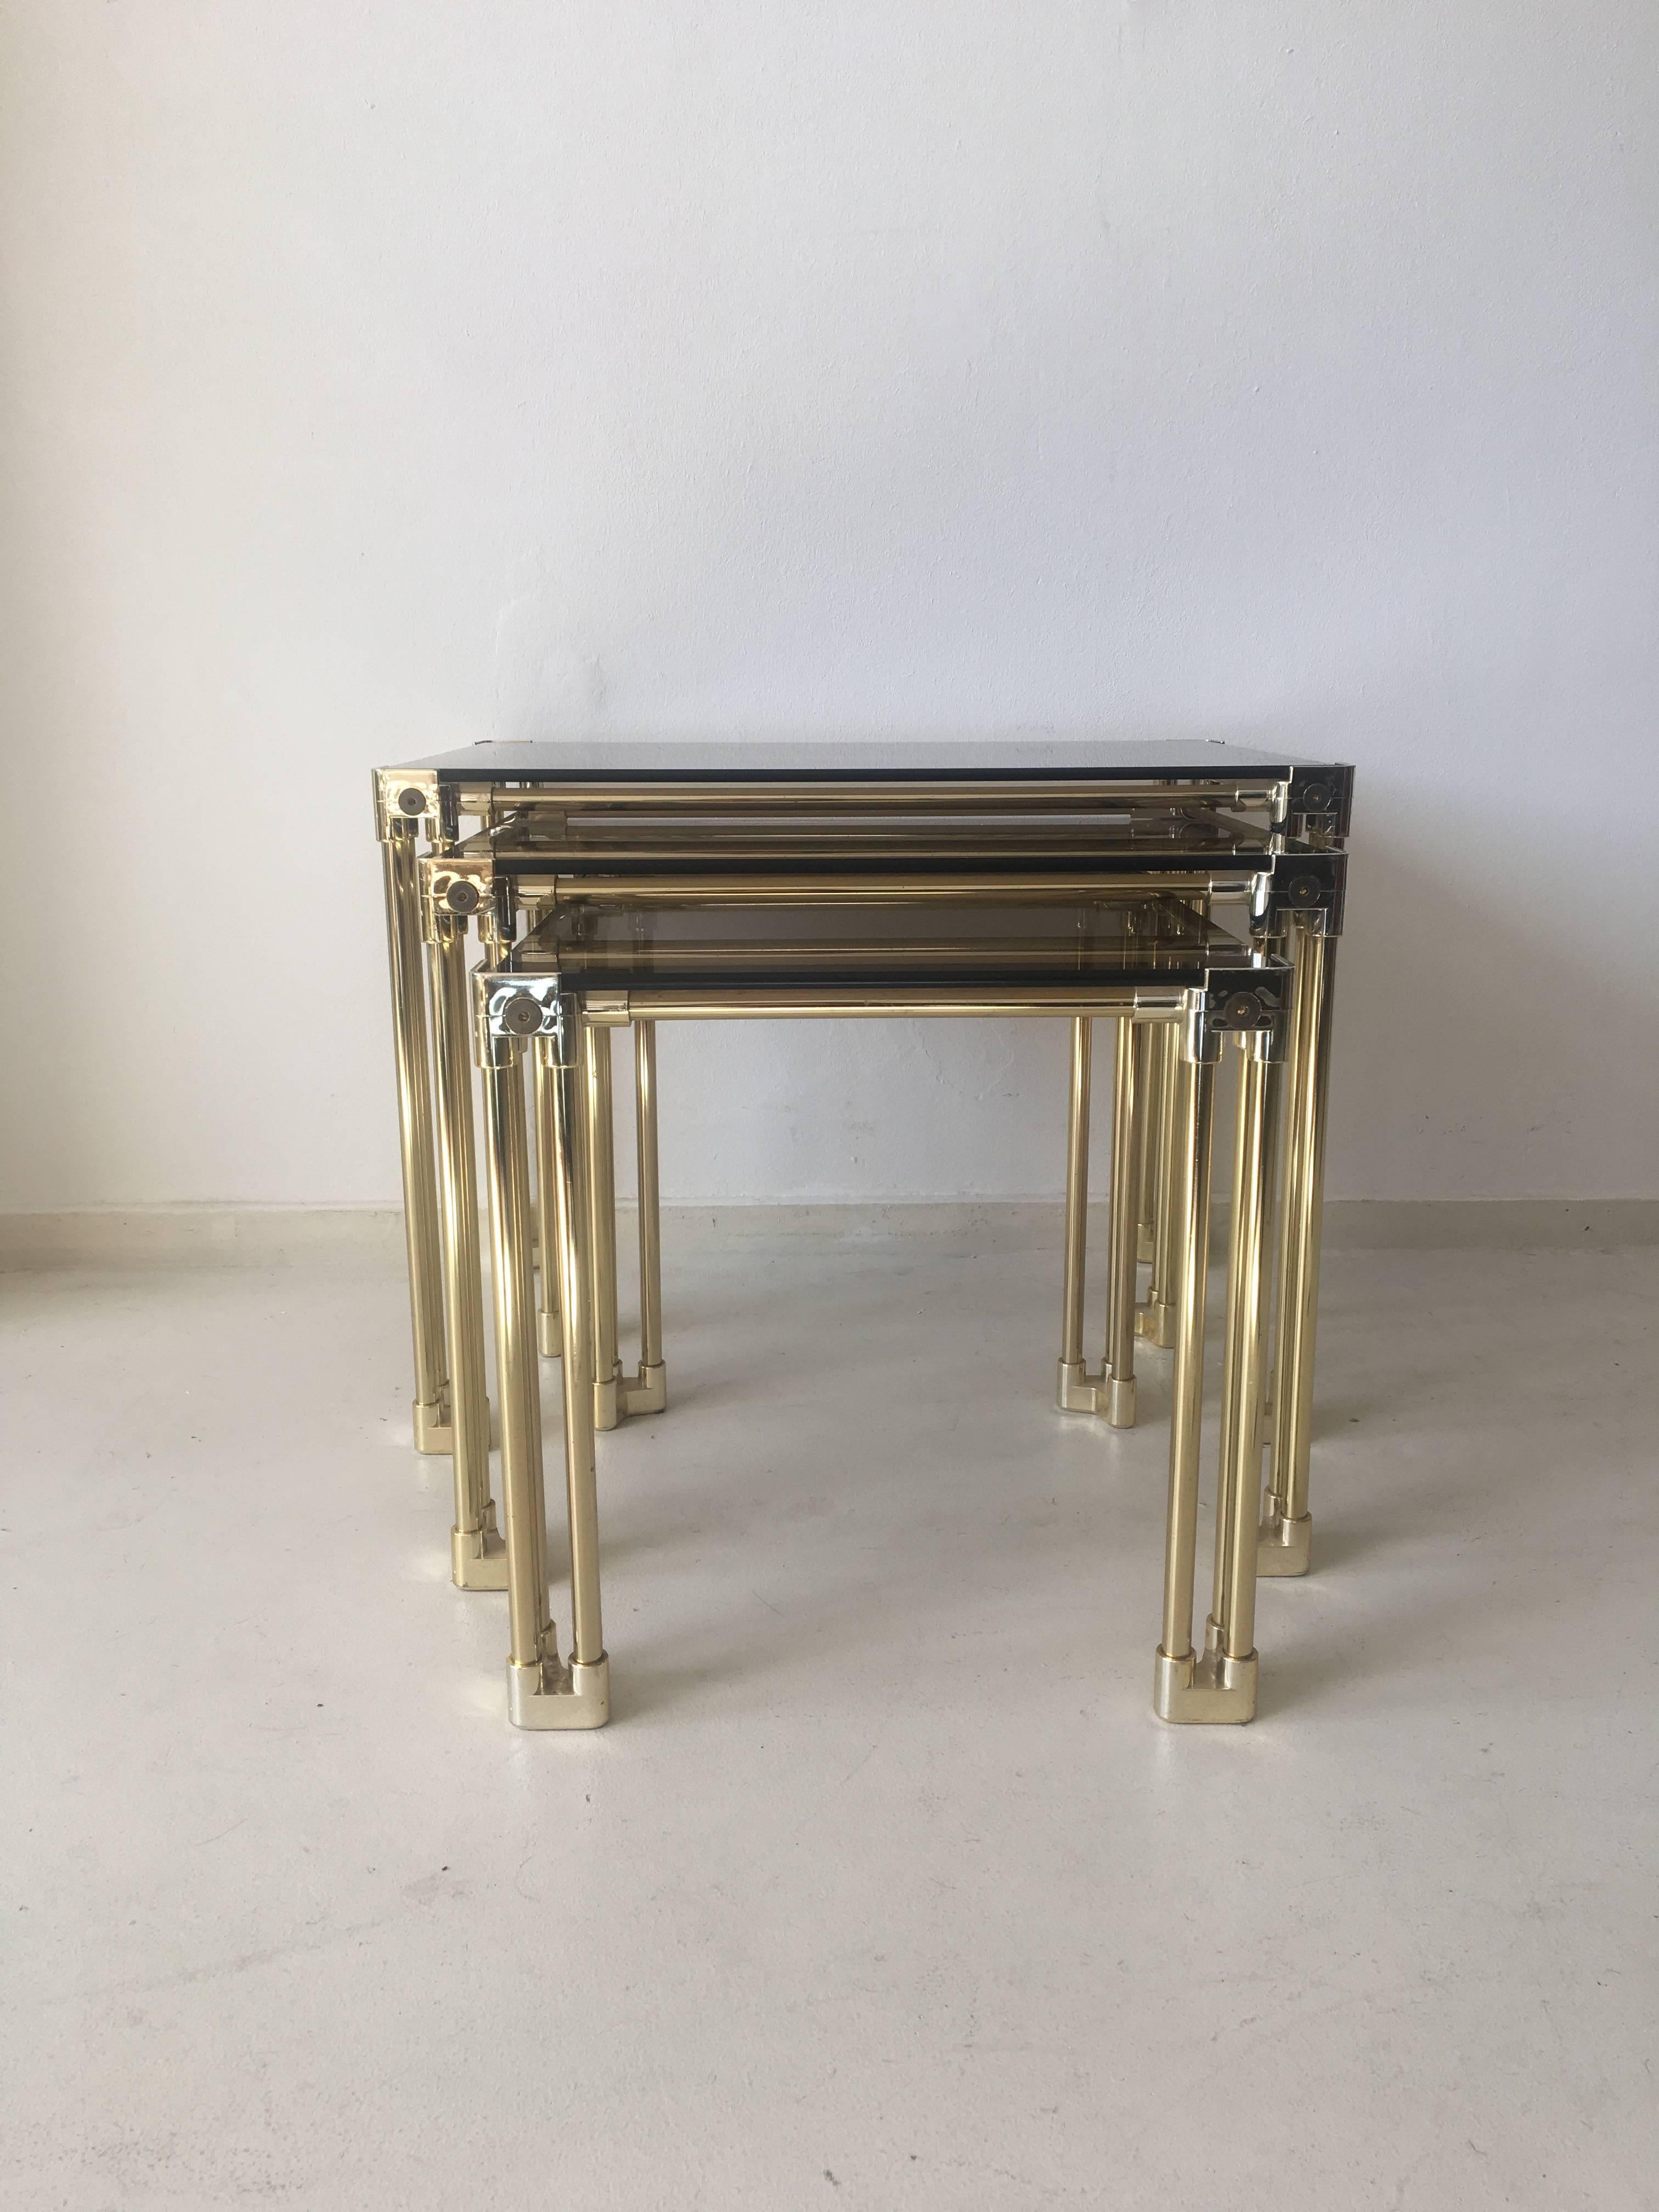 This set of three Hollywood Regency style stacking tables, come with a brass frame and corners in artificial material. Table tops are made of smoked glass. The three of them remain in a very good vintage condition with normal wear.

NOW ON SALE